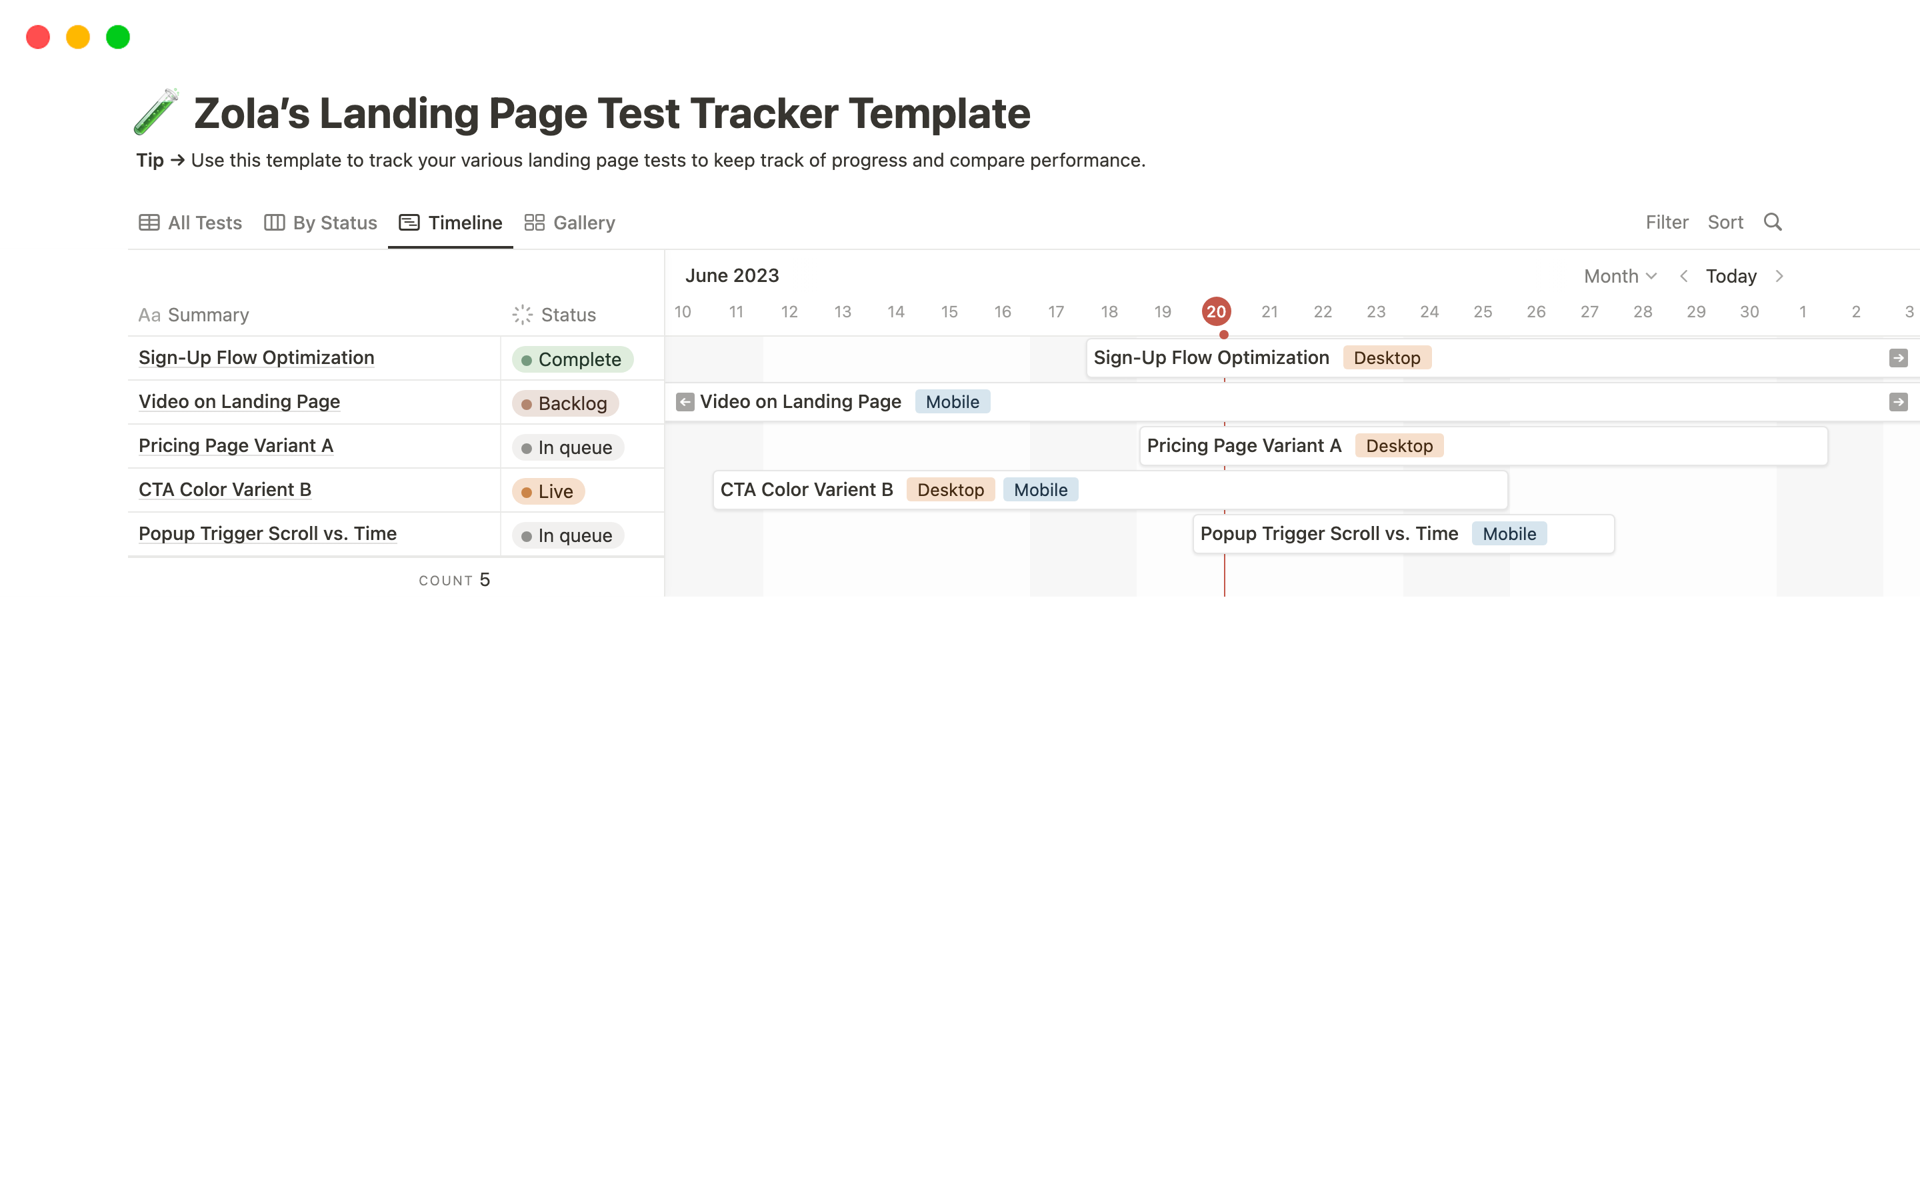 Track your landing page tests and their performance.